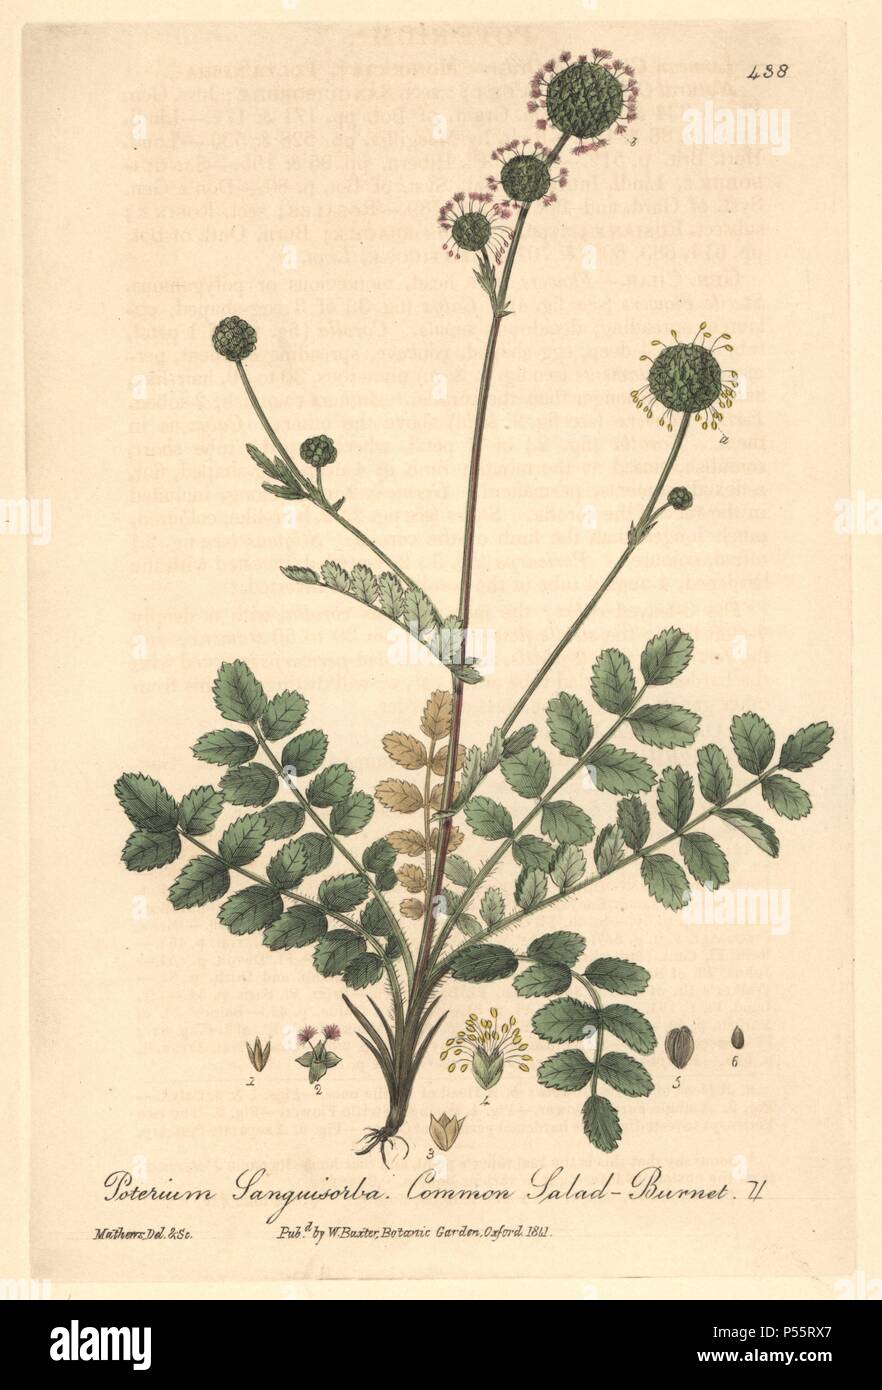 Common salad-burnet, Poterium sanguisorba. Handcoloured copperplate drawn and engraved by Charles Mathews from William Baxter's 'British Phaenogamous Botany,' Oxford, 1841. Scotsman William Baxter (1788-1871) was the curator of the Oxford Botanic Garden from 1813 to 1854. Stock Photo